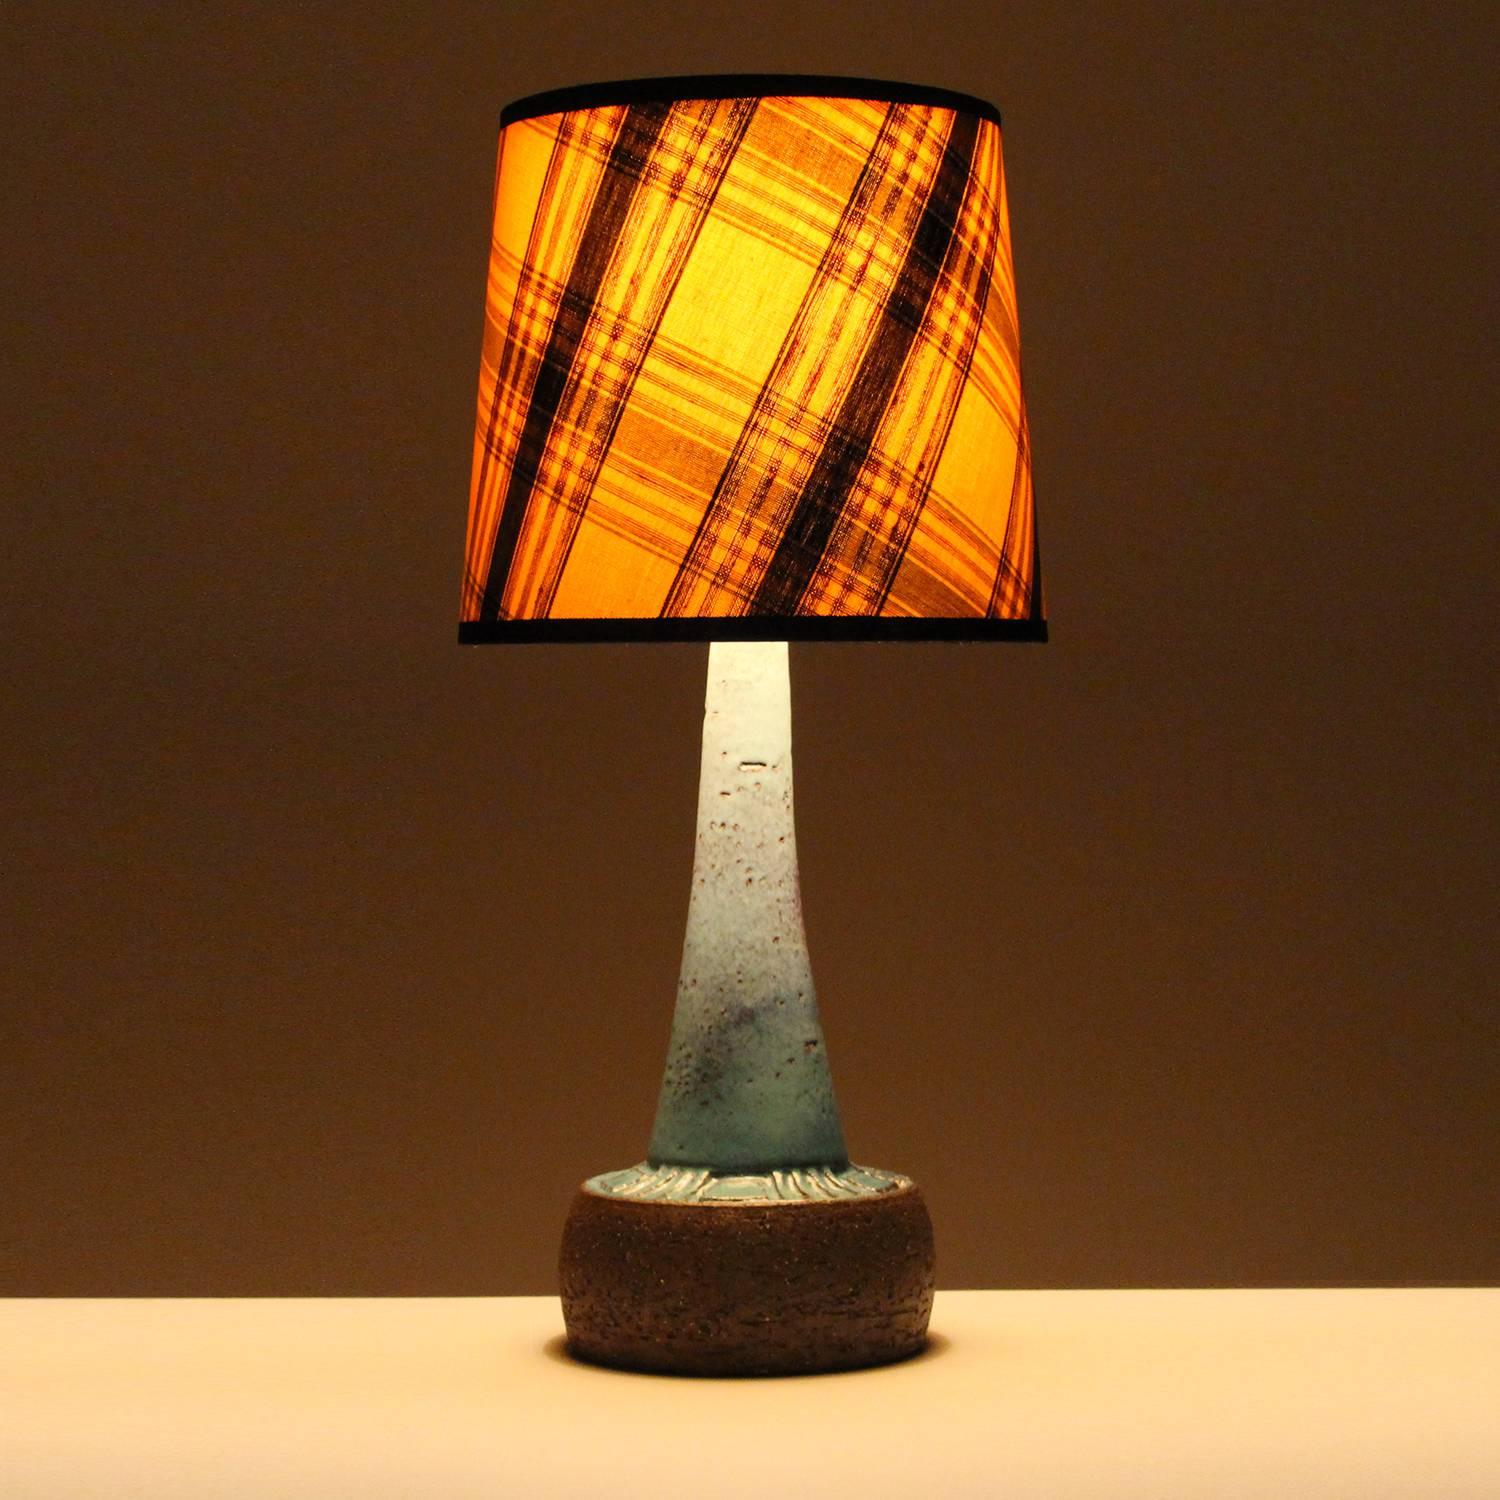 Blue Stoneware table lamp by Sejer Keramikfabrik in the 1960s - attractive lamp stand with vintage blue tartan textile shade included, in excellent vintage condition.

This alluring stoneware lamp stand features a short round body with a